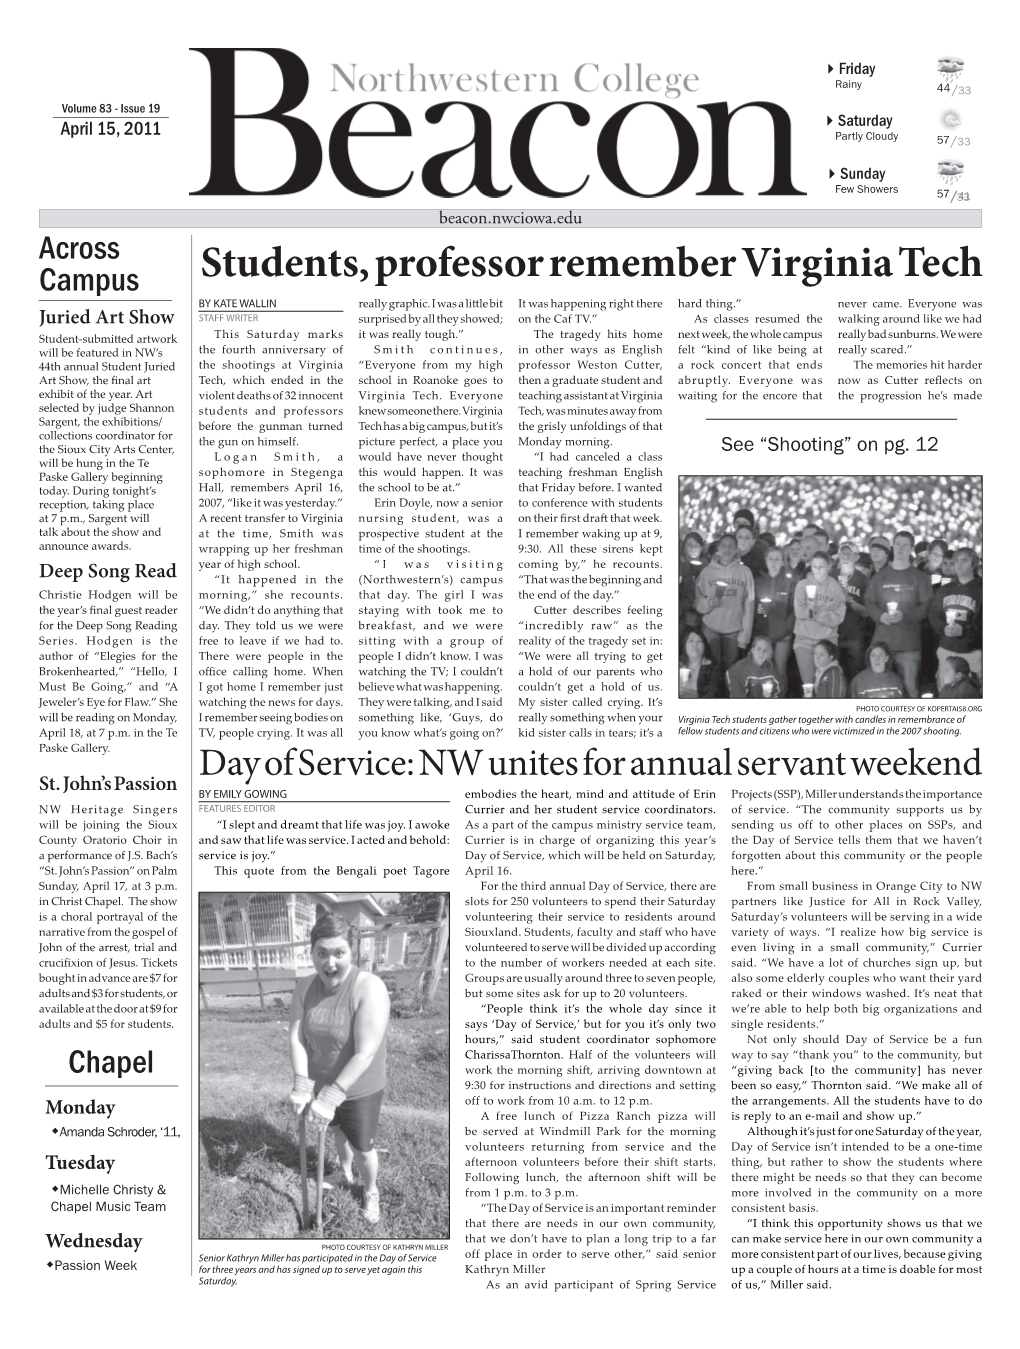 Students, Professor Remember Virginia Tech by KATE WALLIN Really Graphic